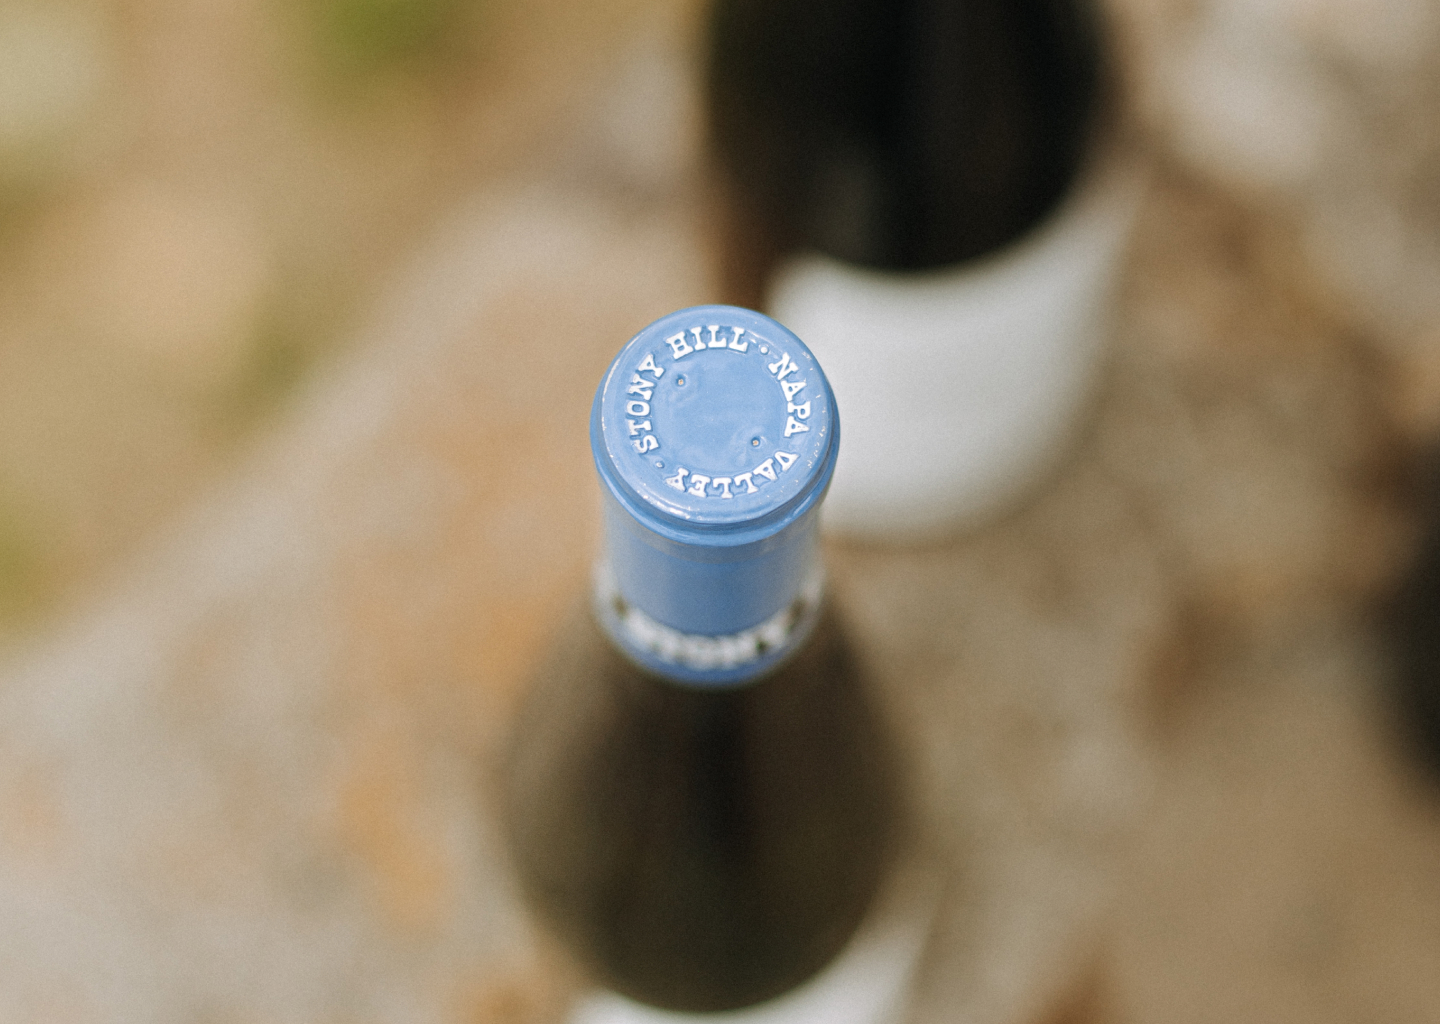 A image of a Stony Hill bottle from the top showing the bottle cap blue foil that says "Stony Hill Napa Valley"